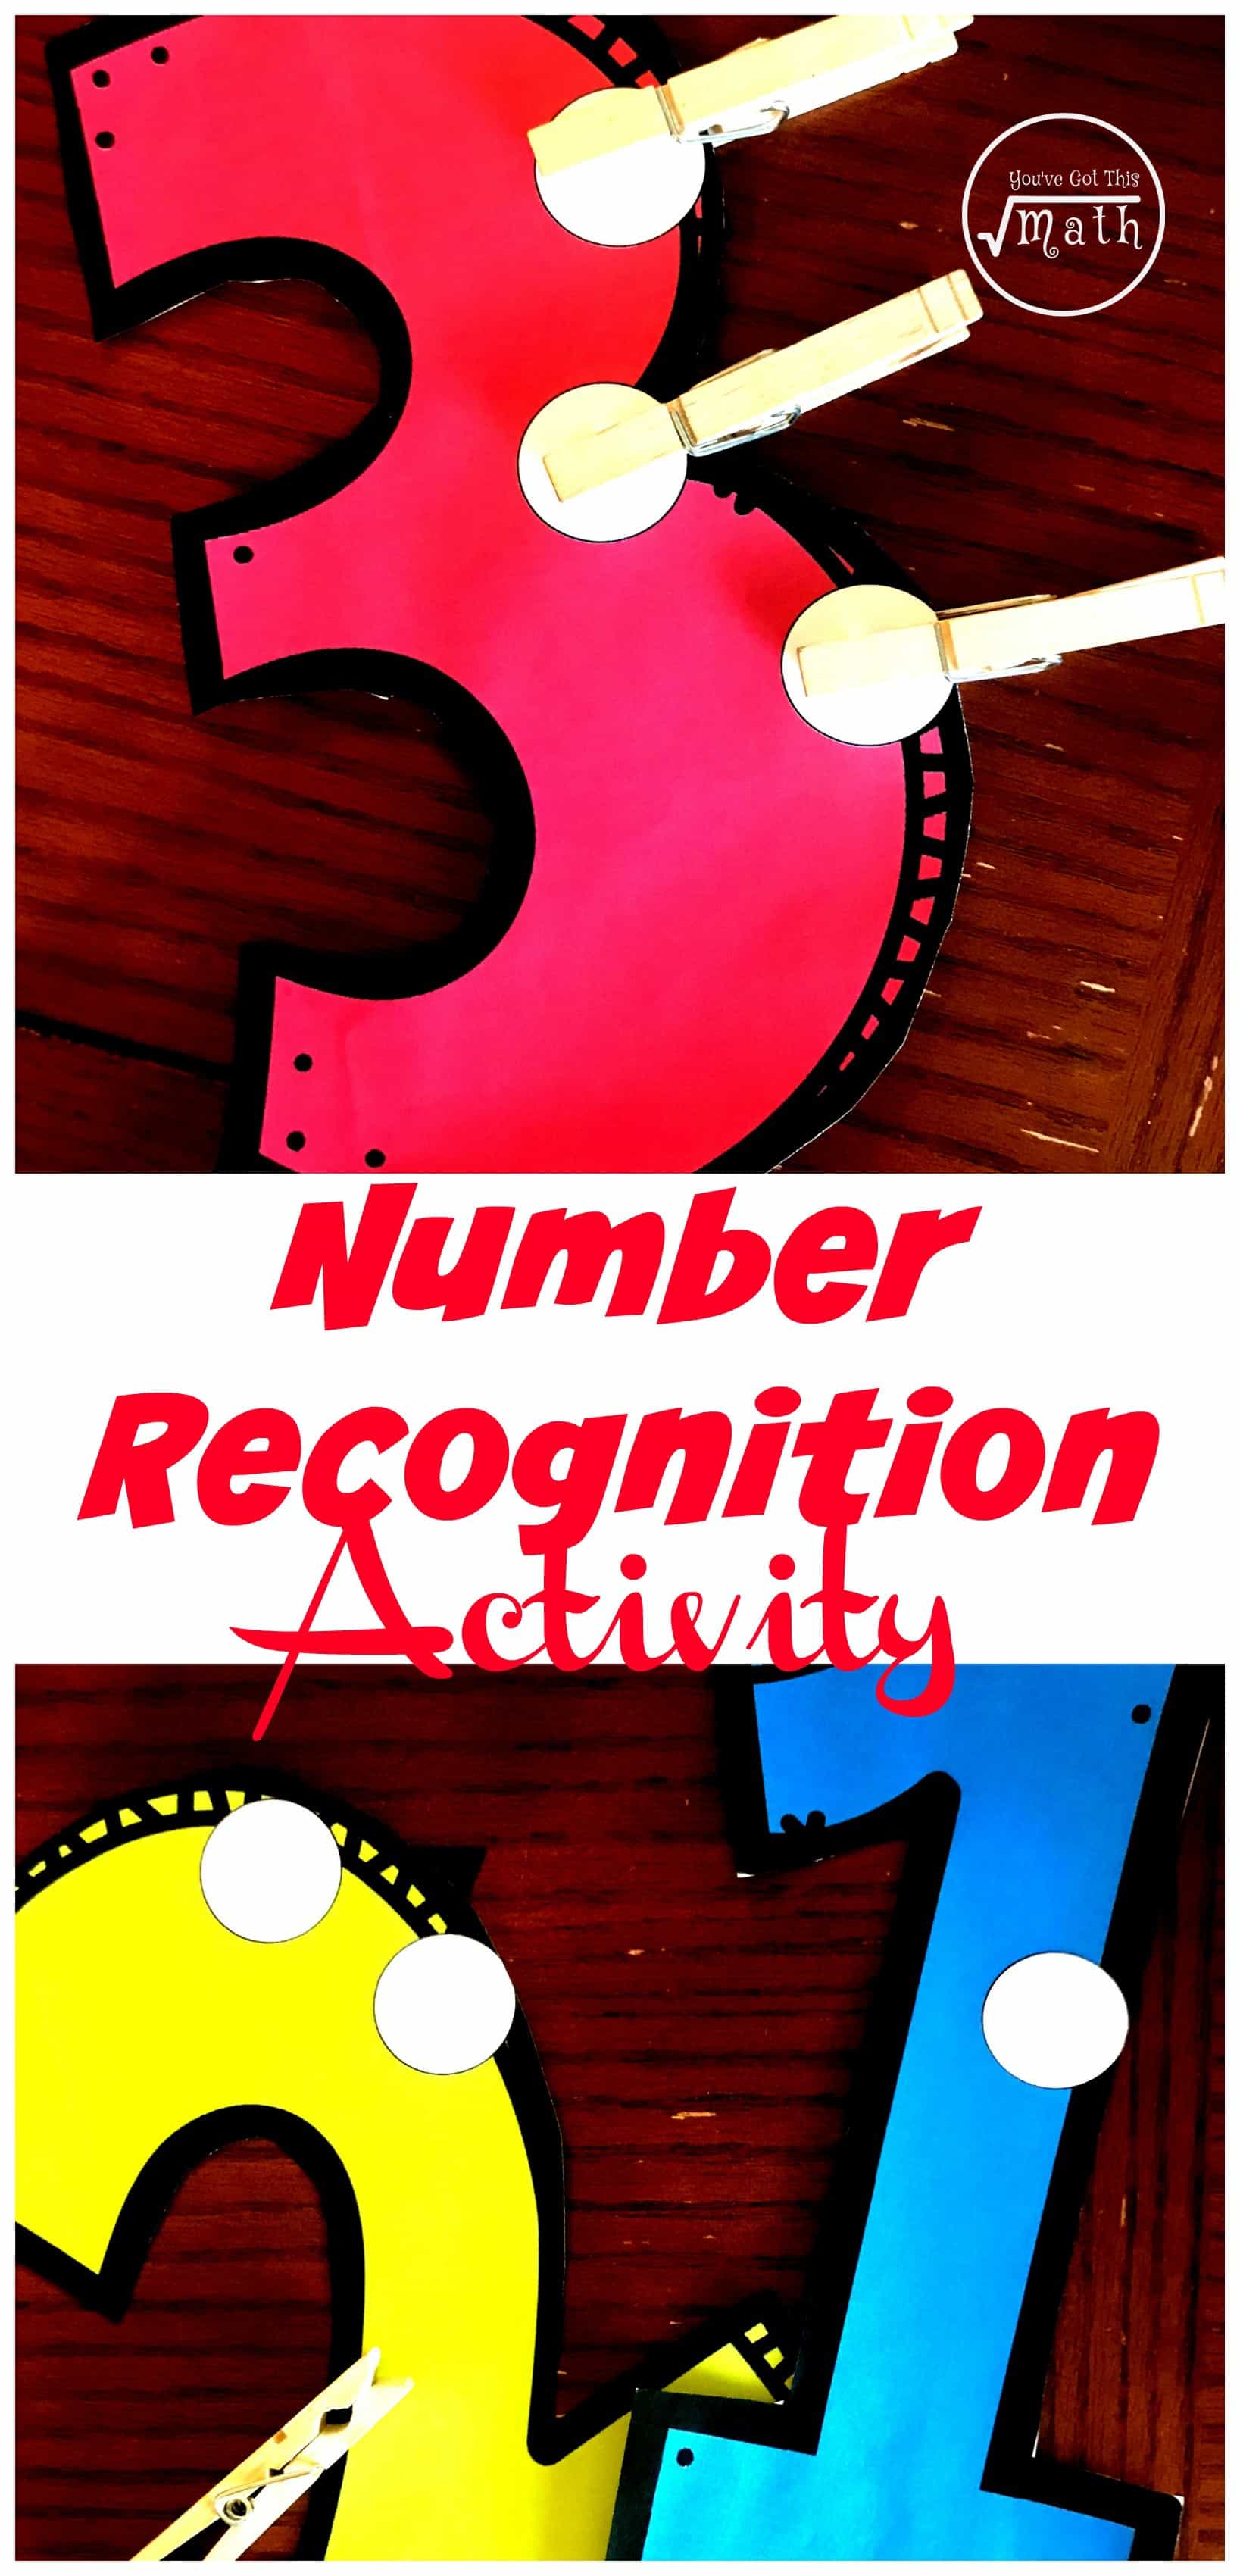 This FREE number recognition activity gets children recognizing numbers, counting, and strengthening their fine motor skills.